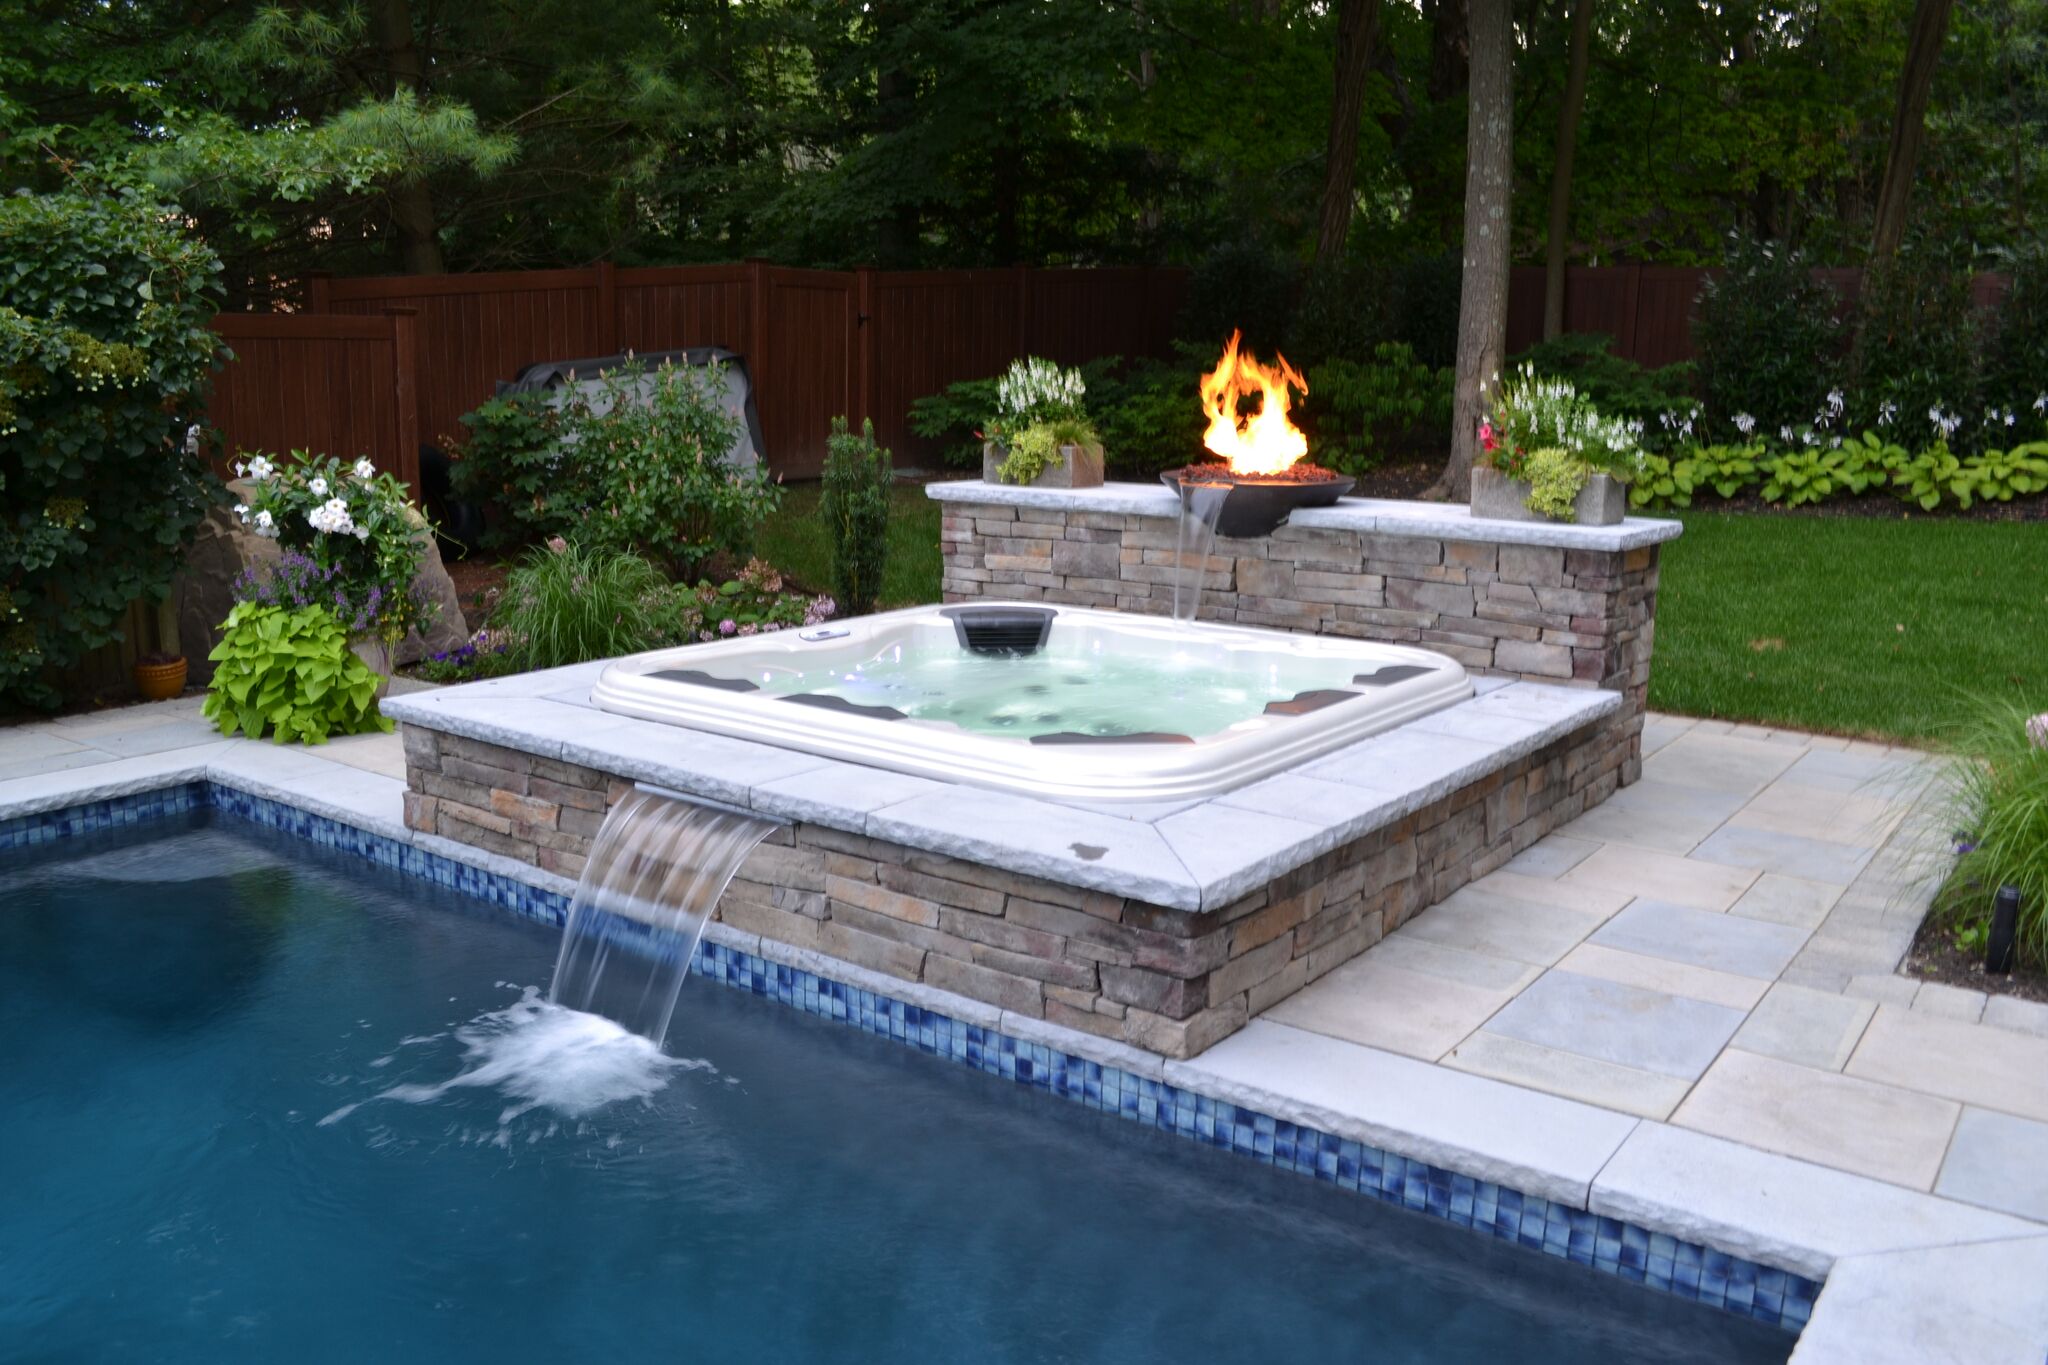 Hot Tub Added to Existing Pool: 